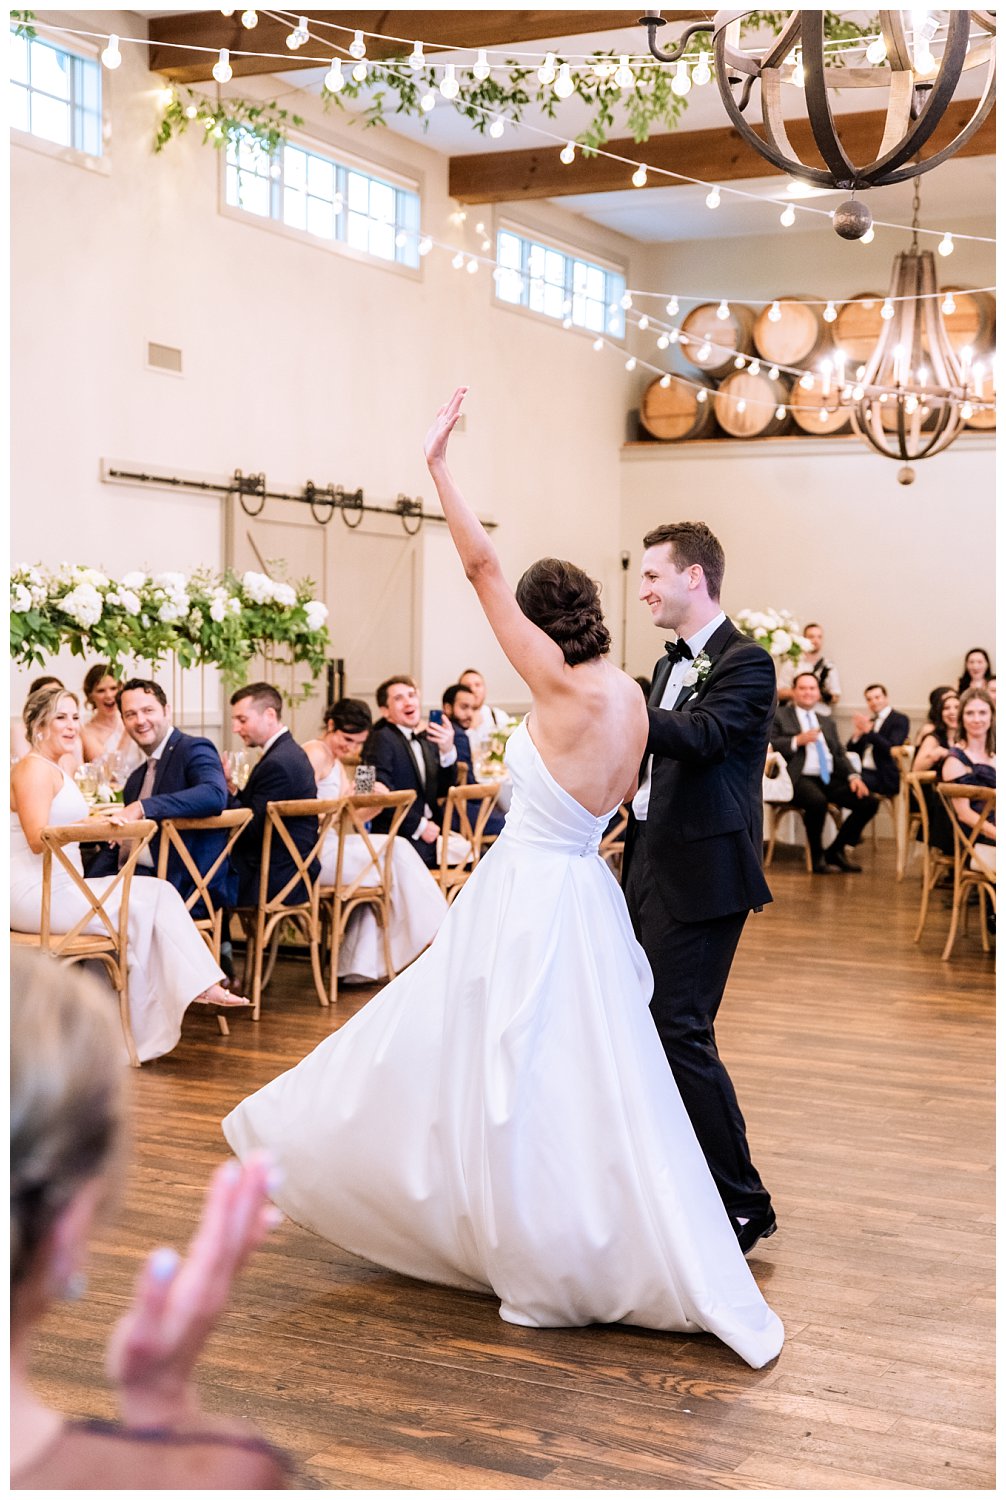 Bride and groom first dance at King Family Vineyard wedding reception